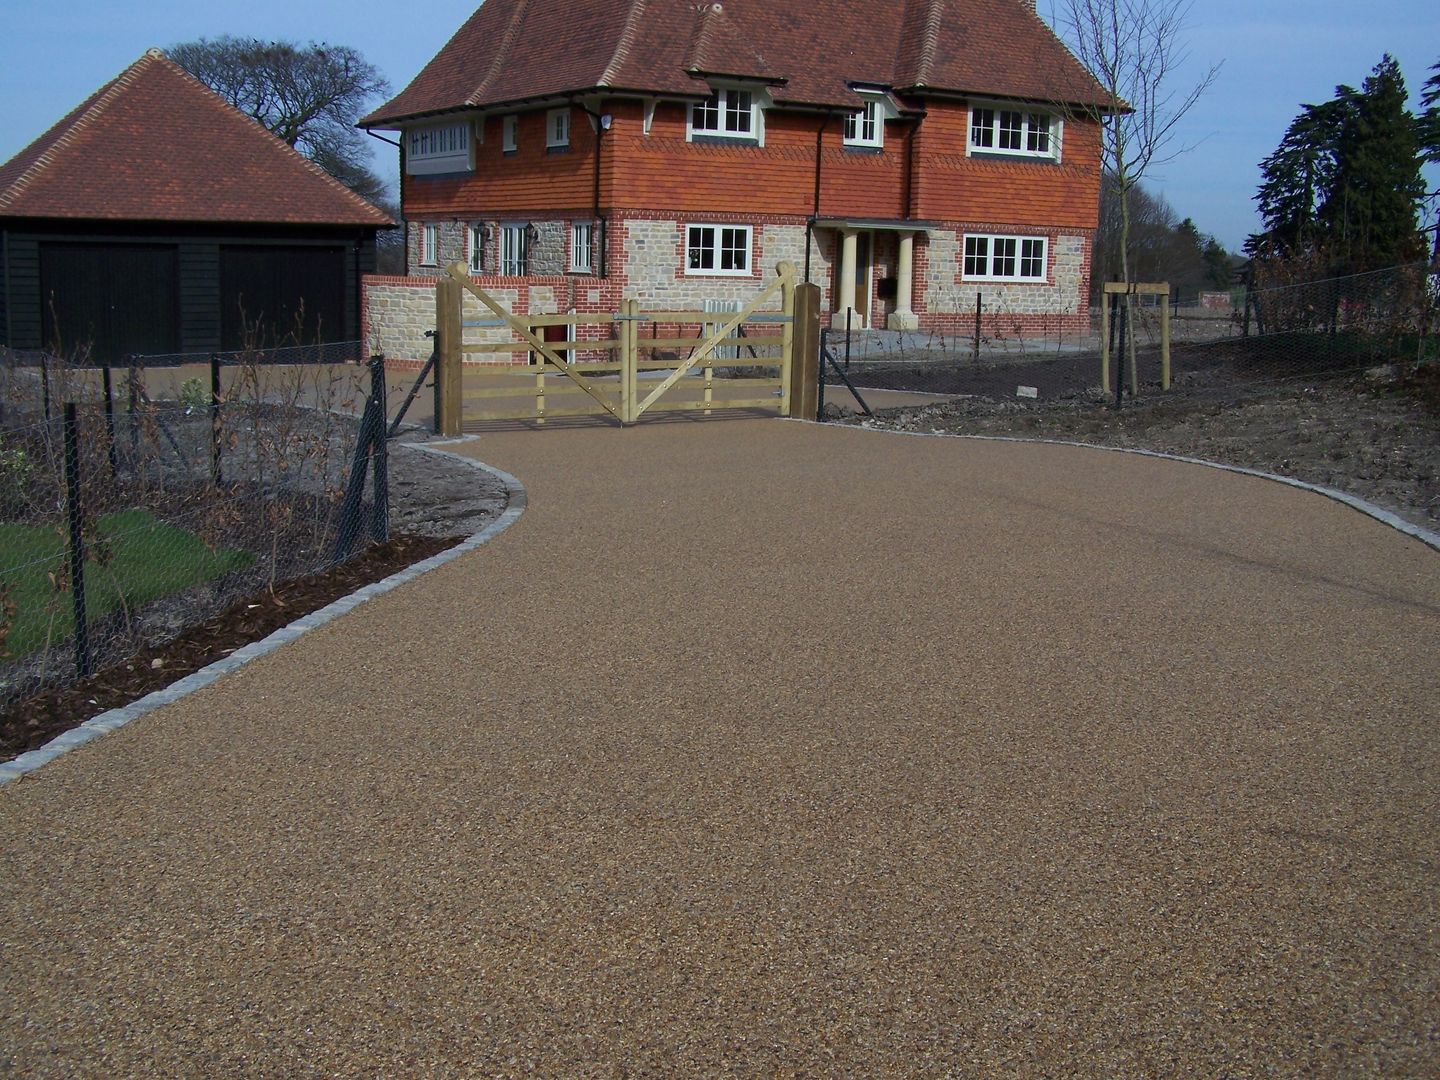 Domestic Driveways installation of resin bound paving, Permeable Paving Solutions UK Permeable Paving Solutions UK Rustykalne ściany i podłogi